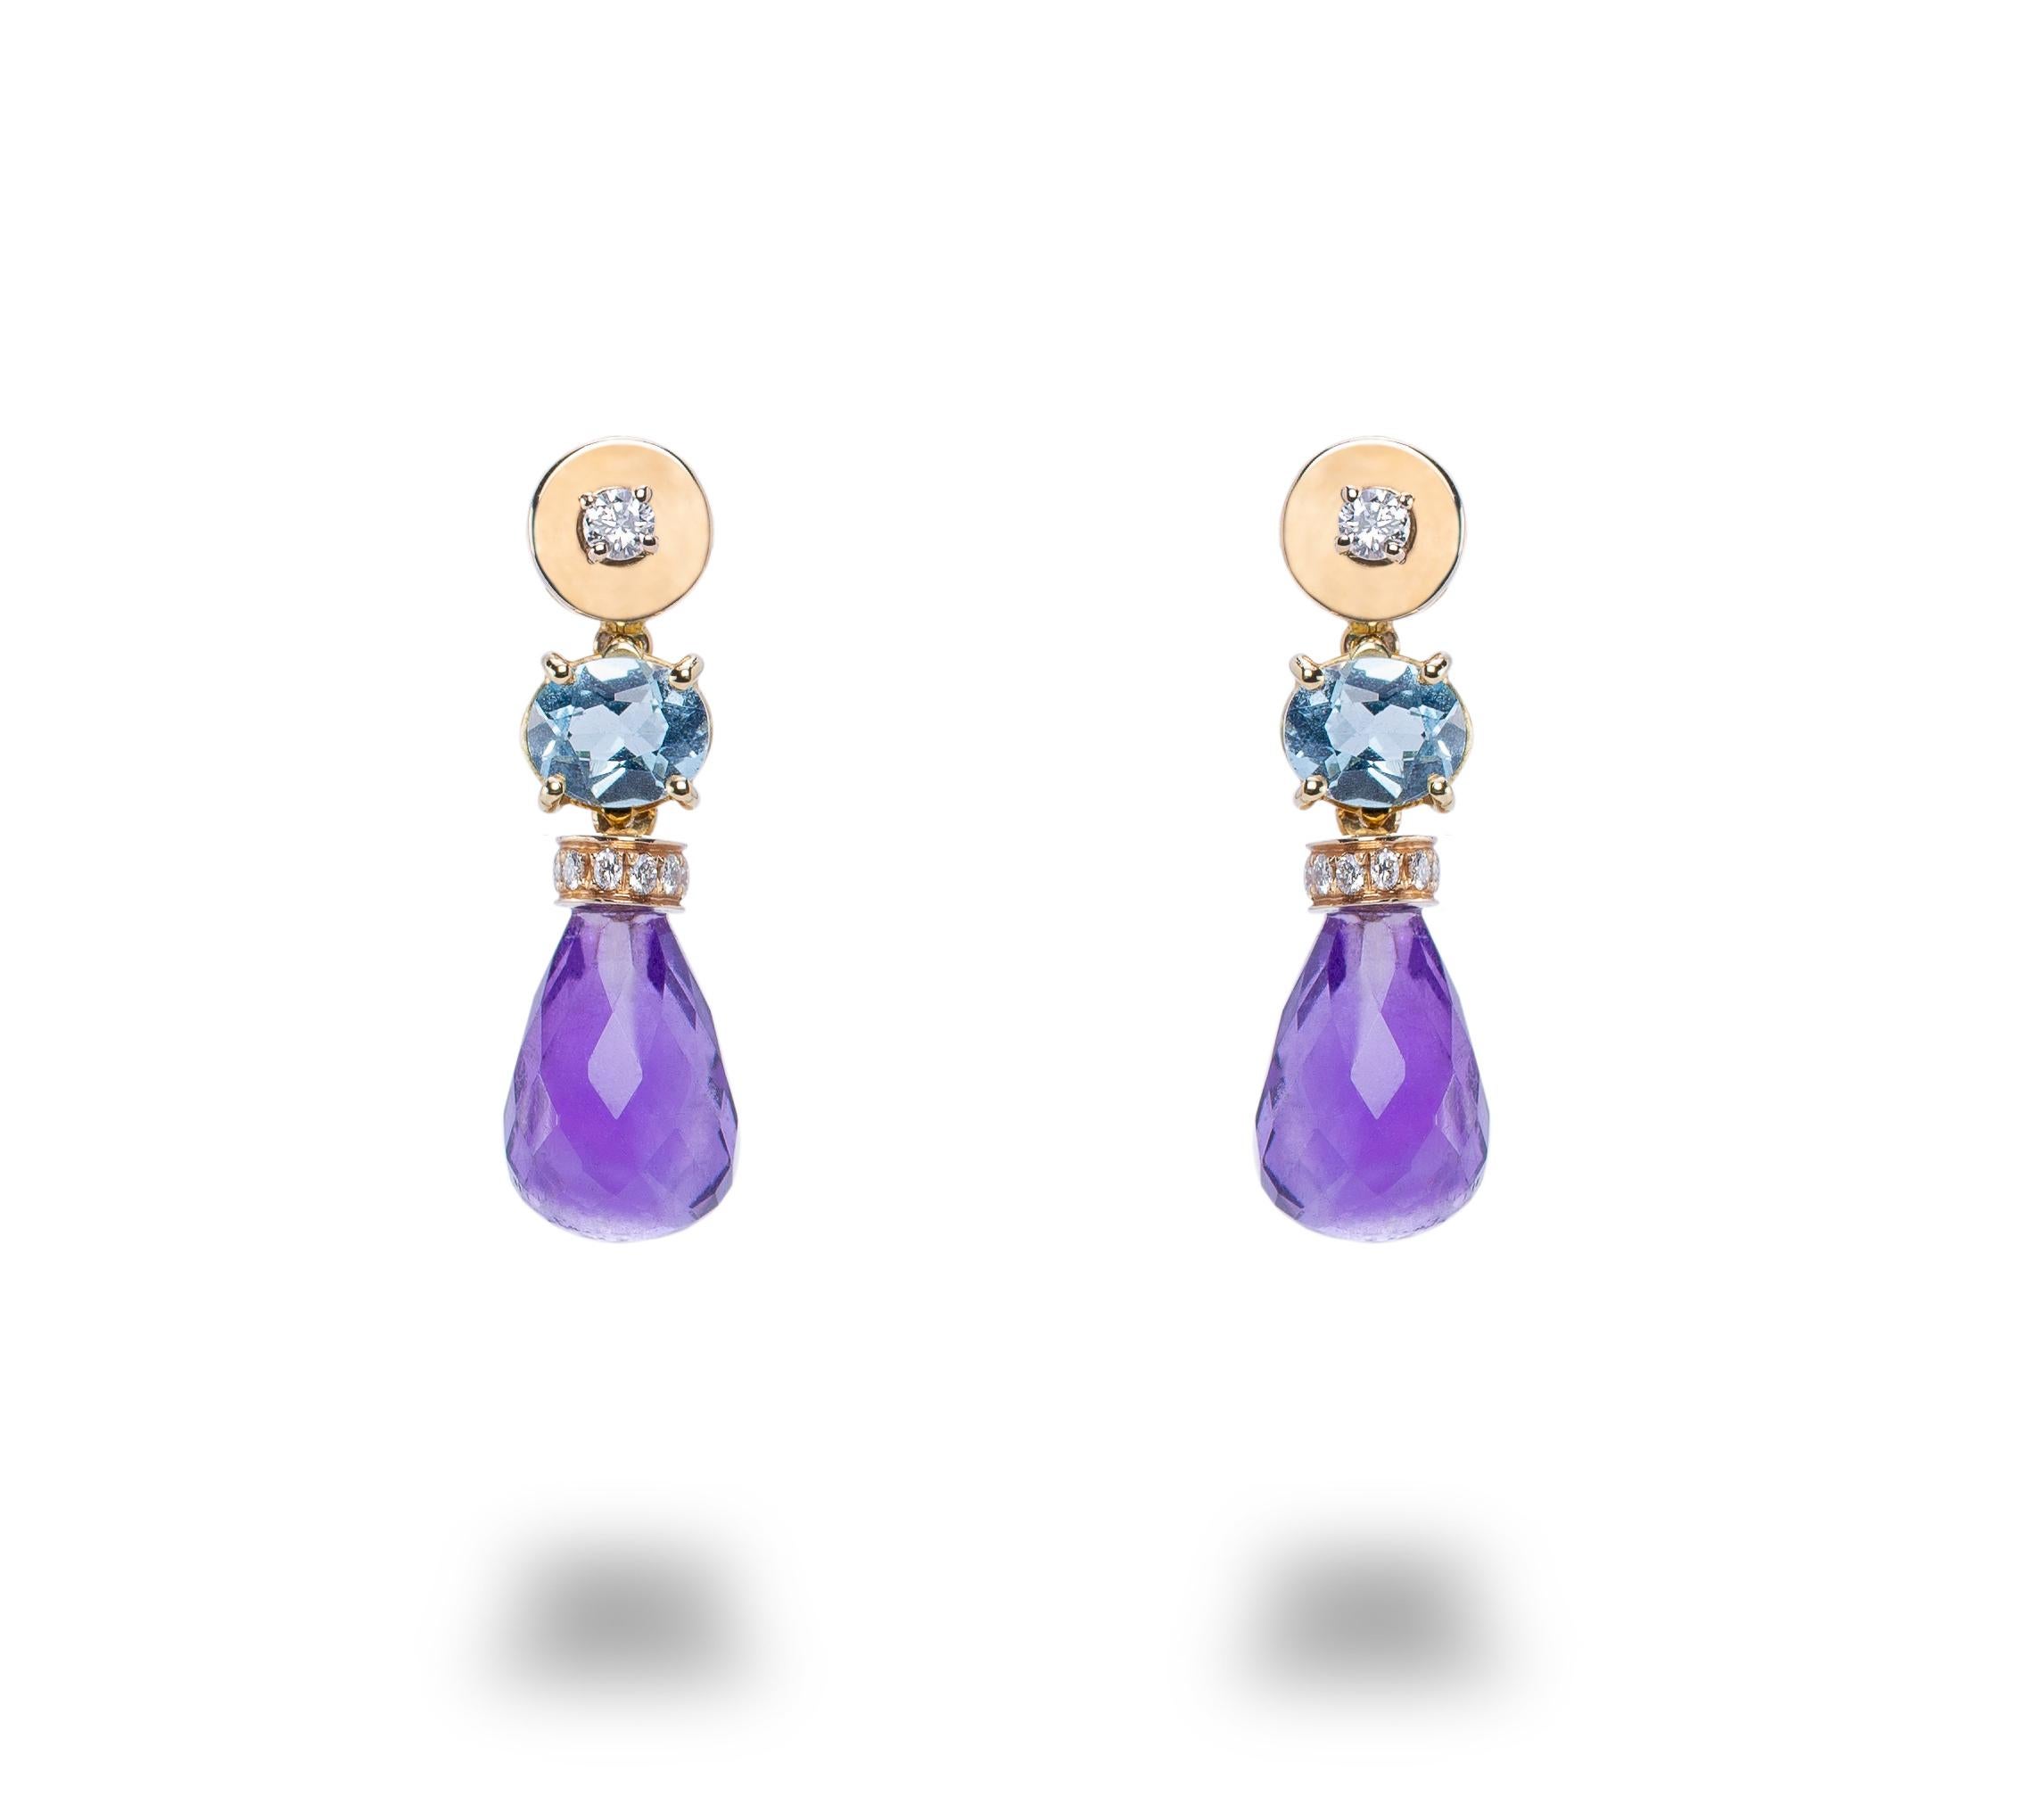 18 Karat Yellow Gold 0.30 Karat White Diamond Blue Topaz Amethyst Grapes Drop Earrings
Here there are some beautiful Rossella Ugolini Grape earrings handcrafted in 18 karats Rose Gold and embellished with 0.30 Karats White Diamonds, Blue Topaz and